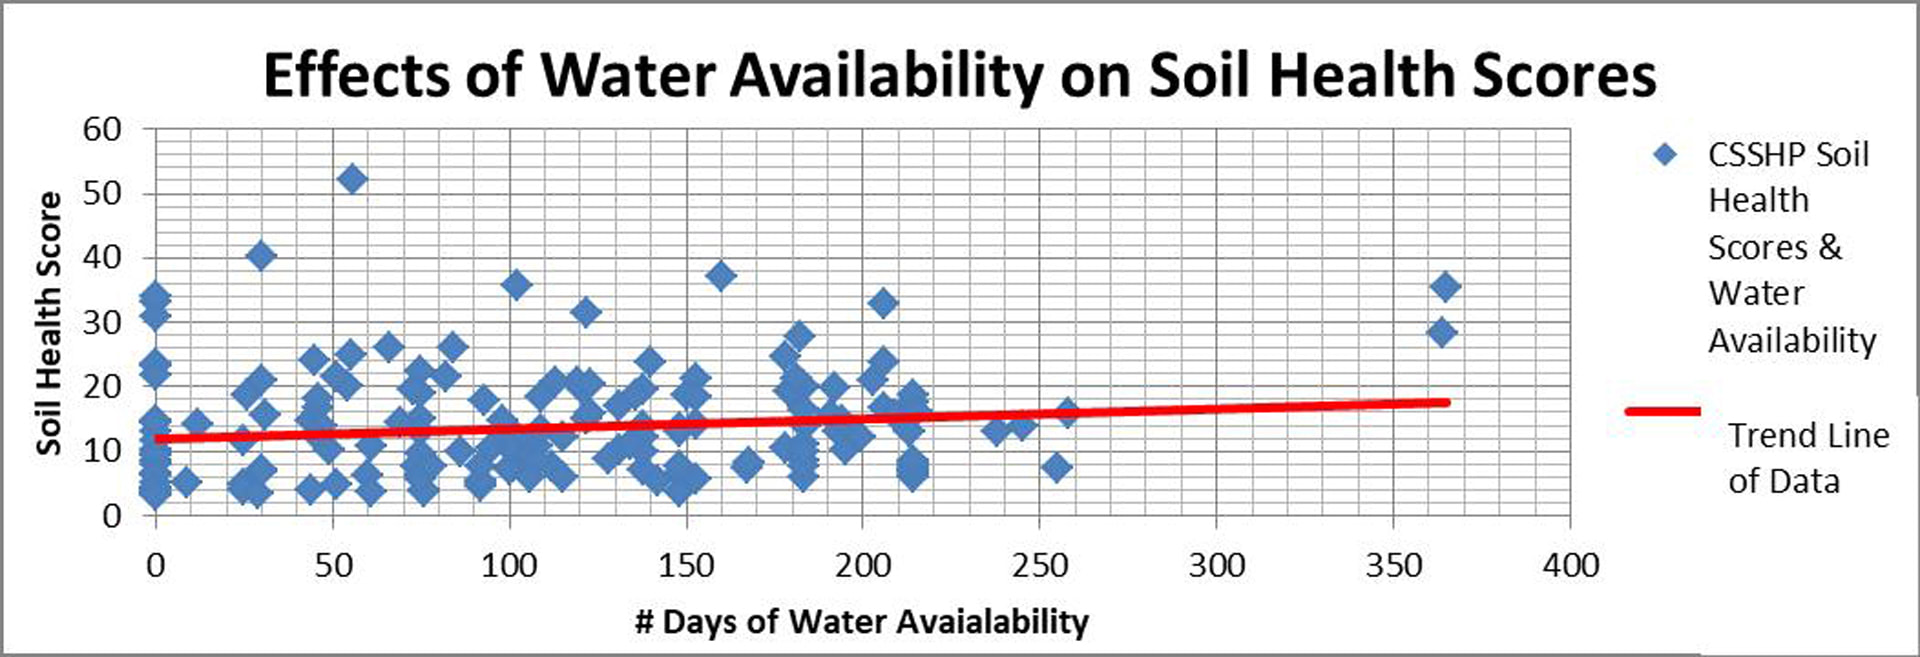 Irrigation water affects soil health